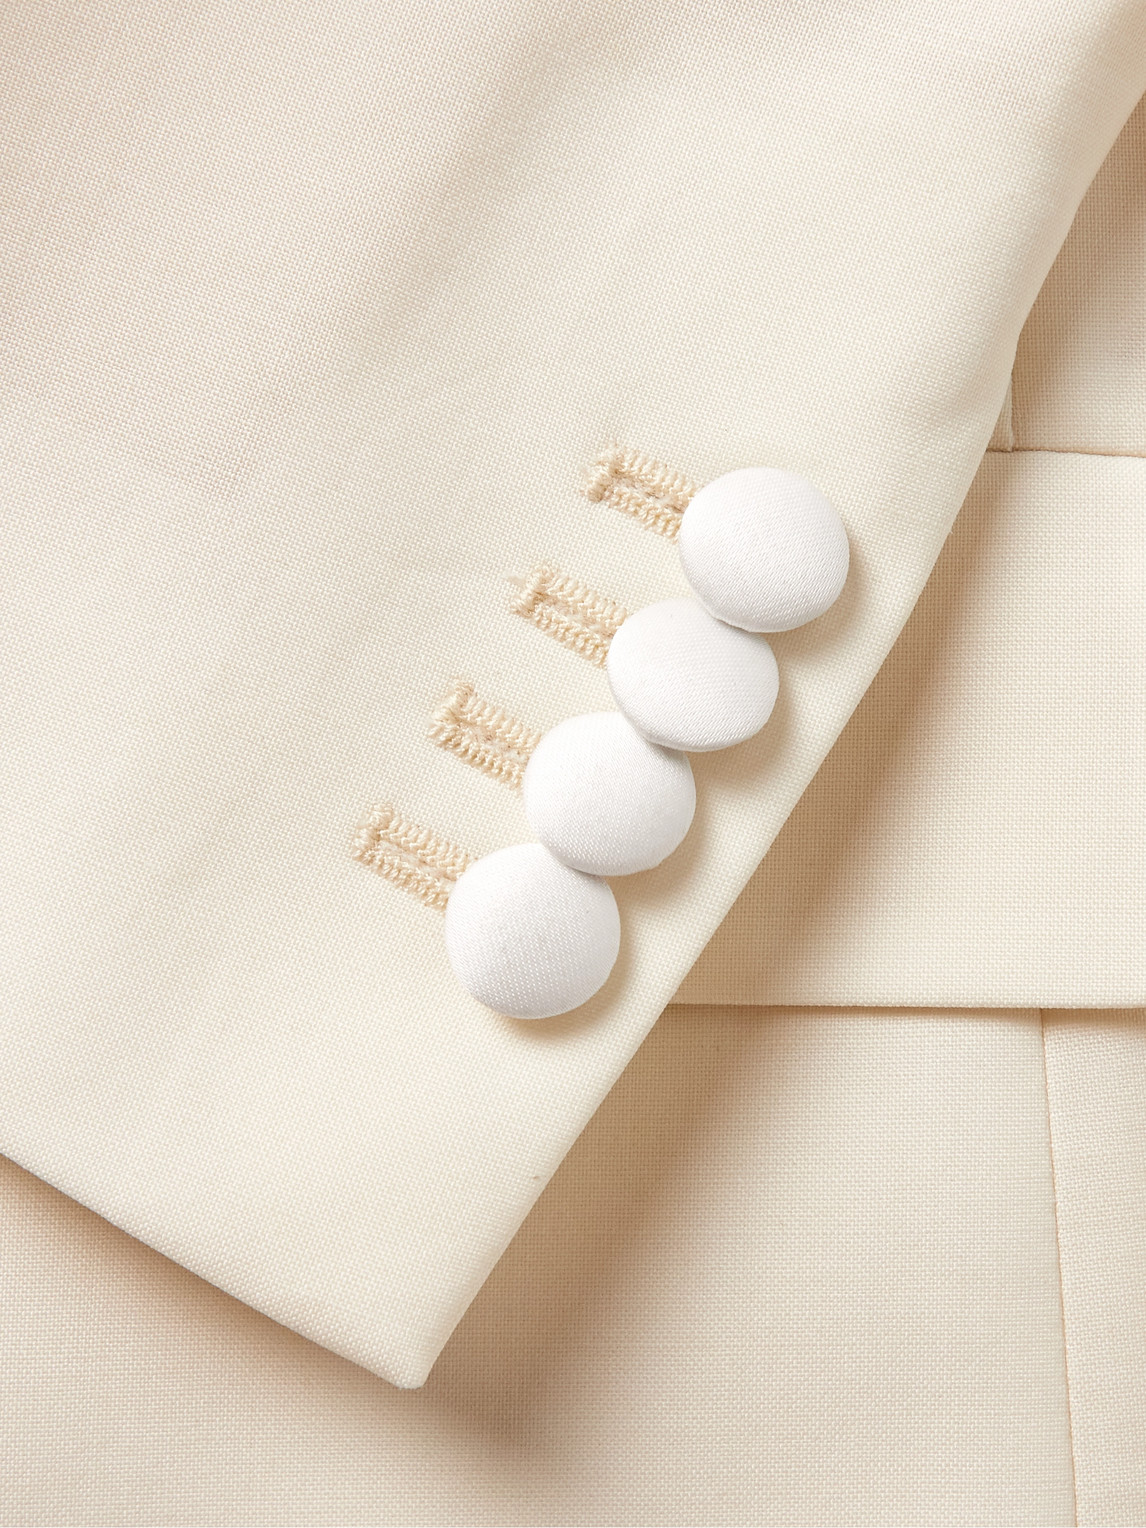 Shop Paul Smith Slim-fit Double-breasted Satin-trimmed Wool And Mohair-blend Tuxedo Jacket In Neutrals